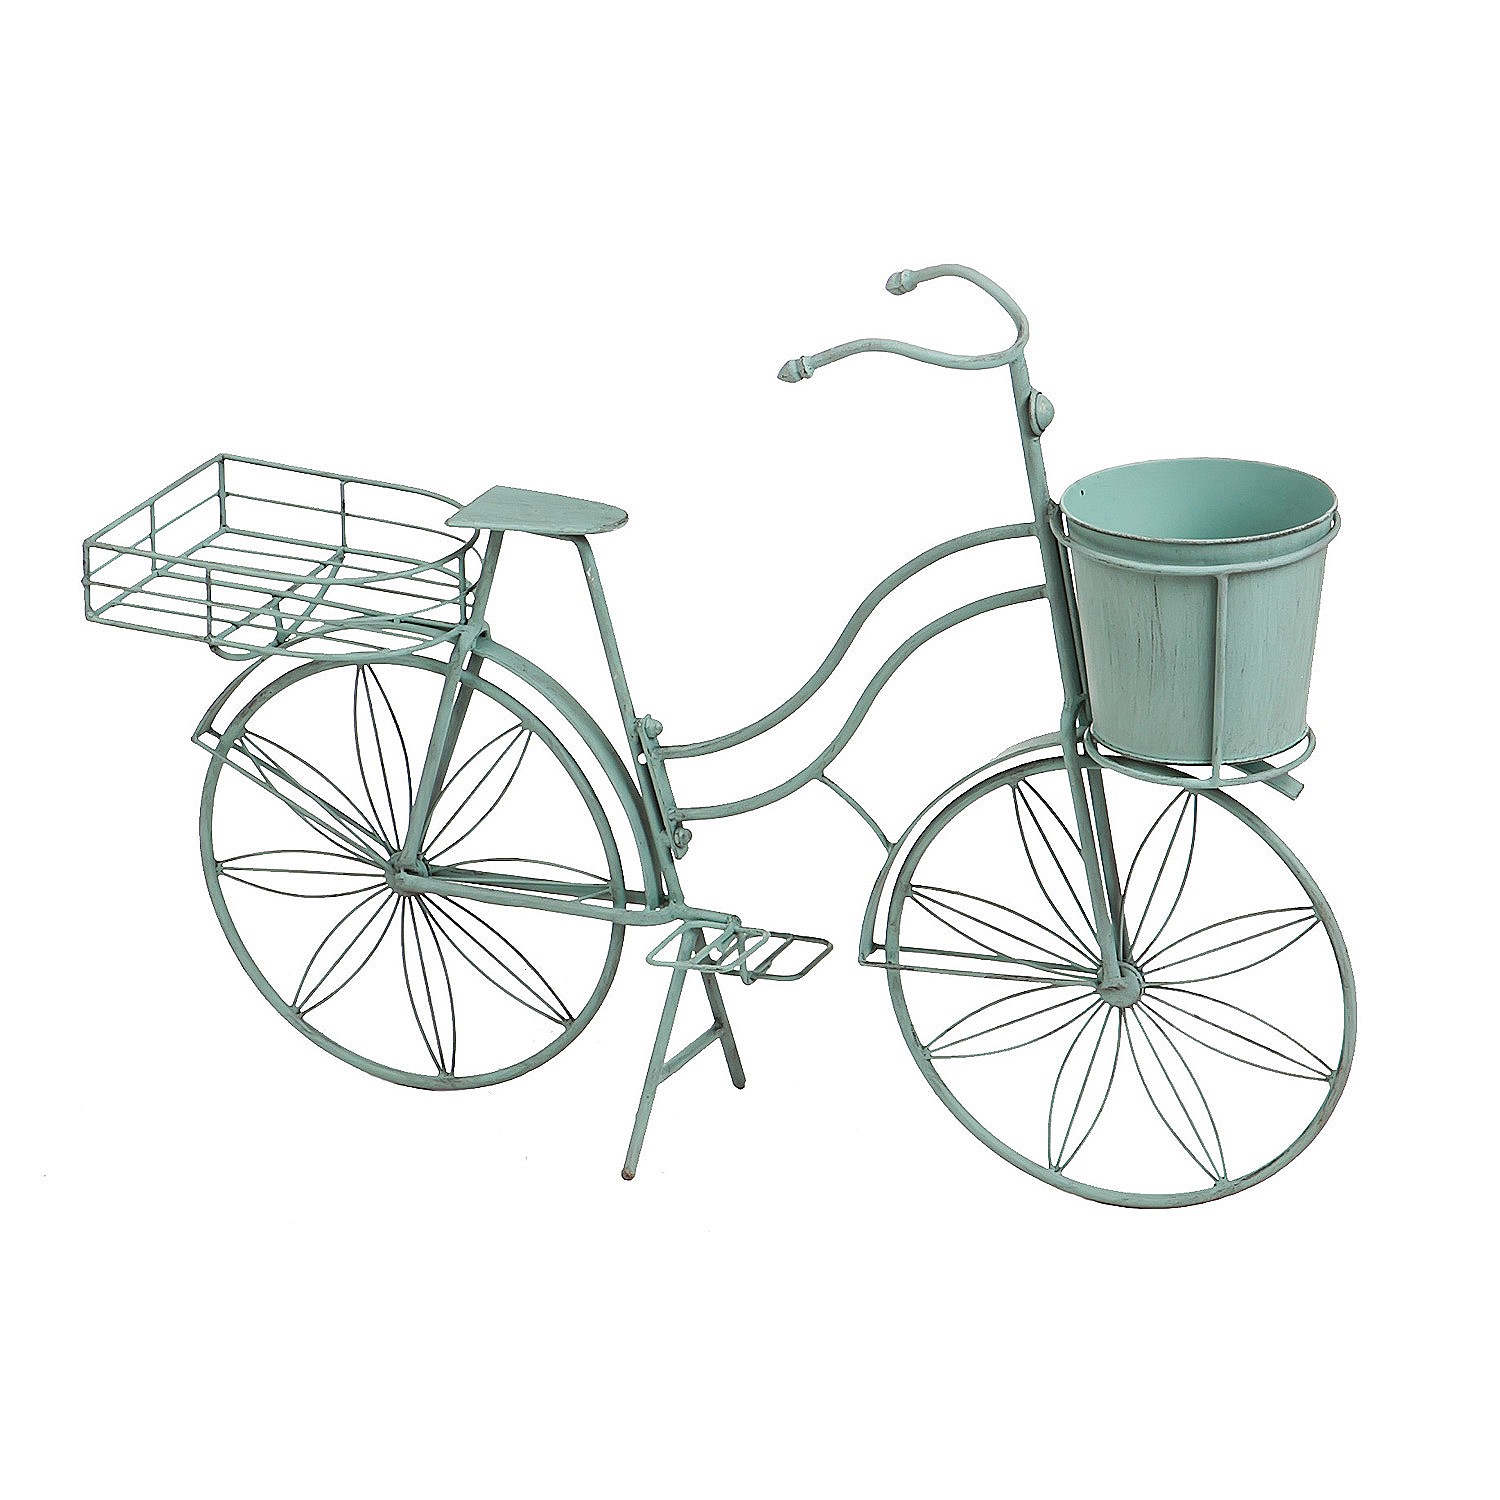 Evergreen Vintage Teal Bicycle Planter Outdoor Safe Decor - image 1 of 5